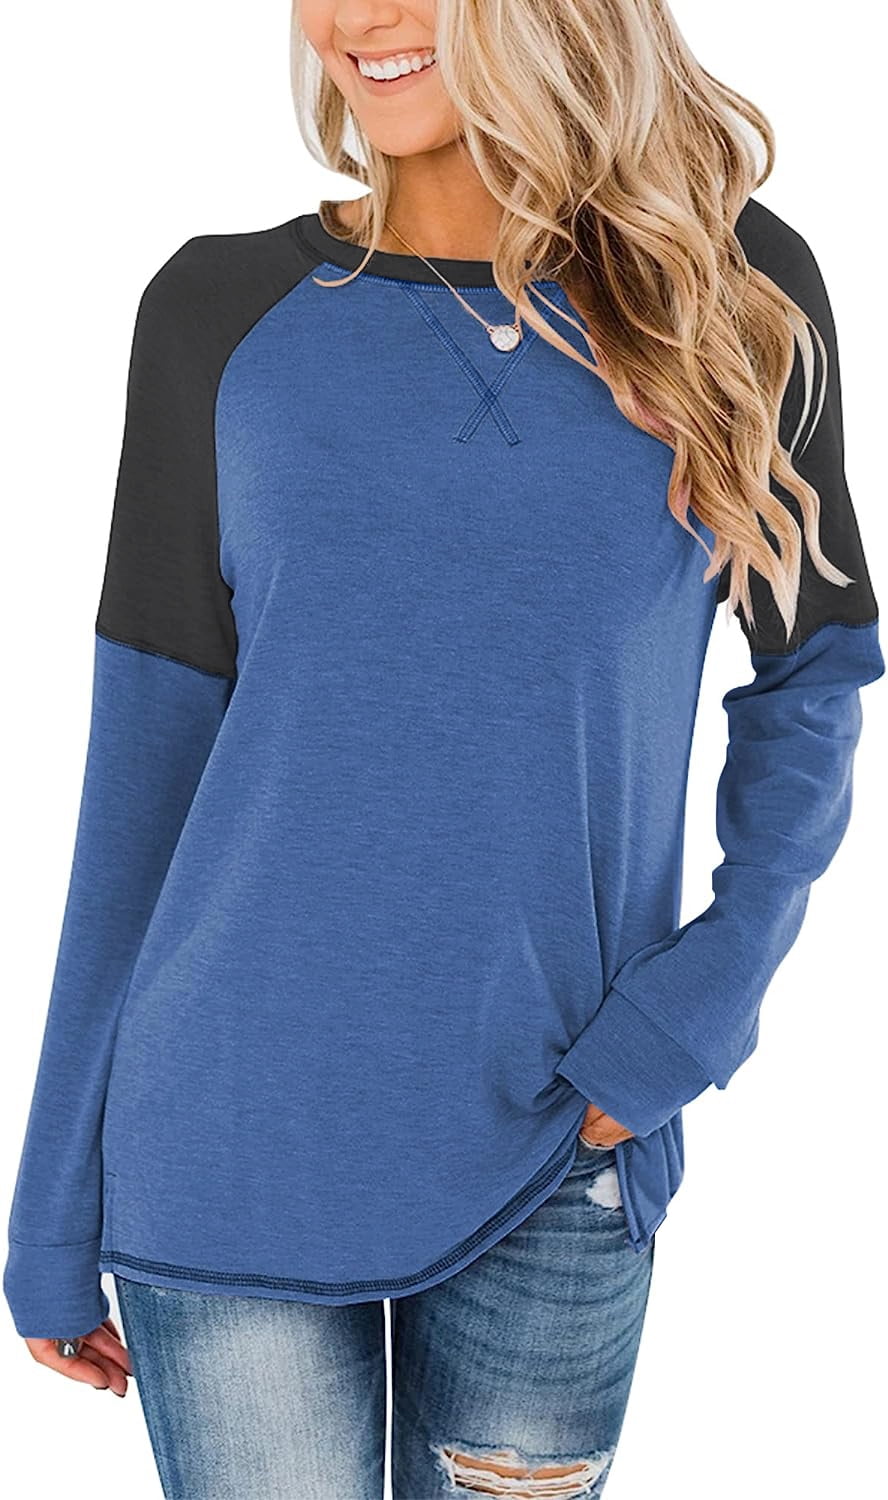 Anyjoin Women's Casual Long Sleeve Tunic Tops Crew Neck Color Block ...